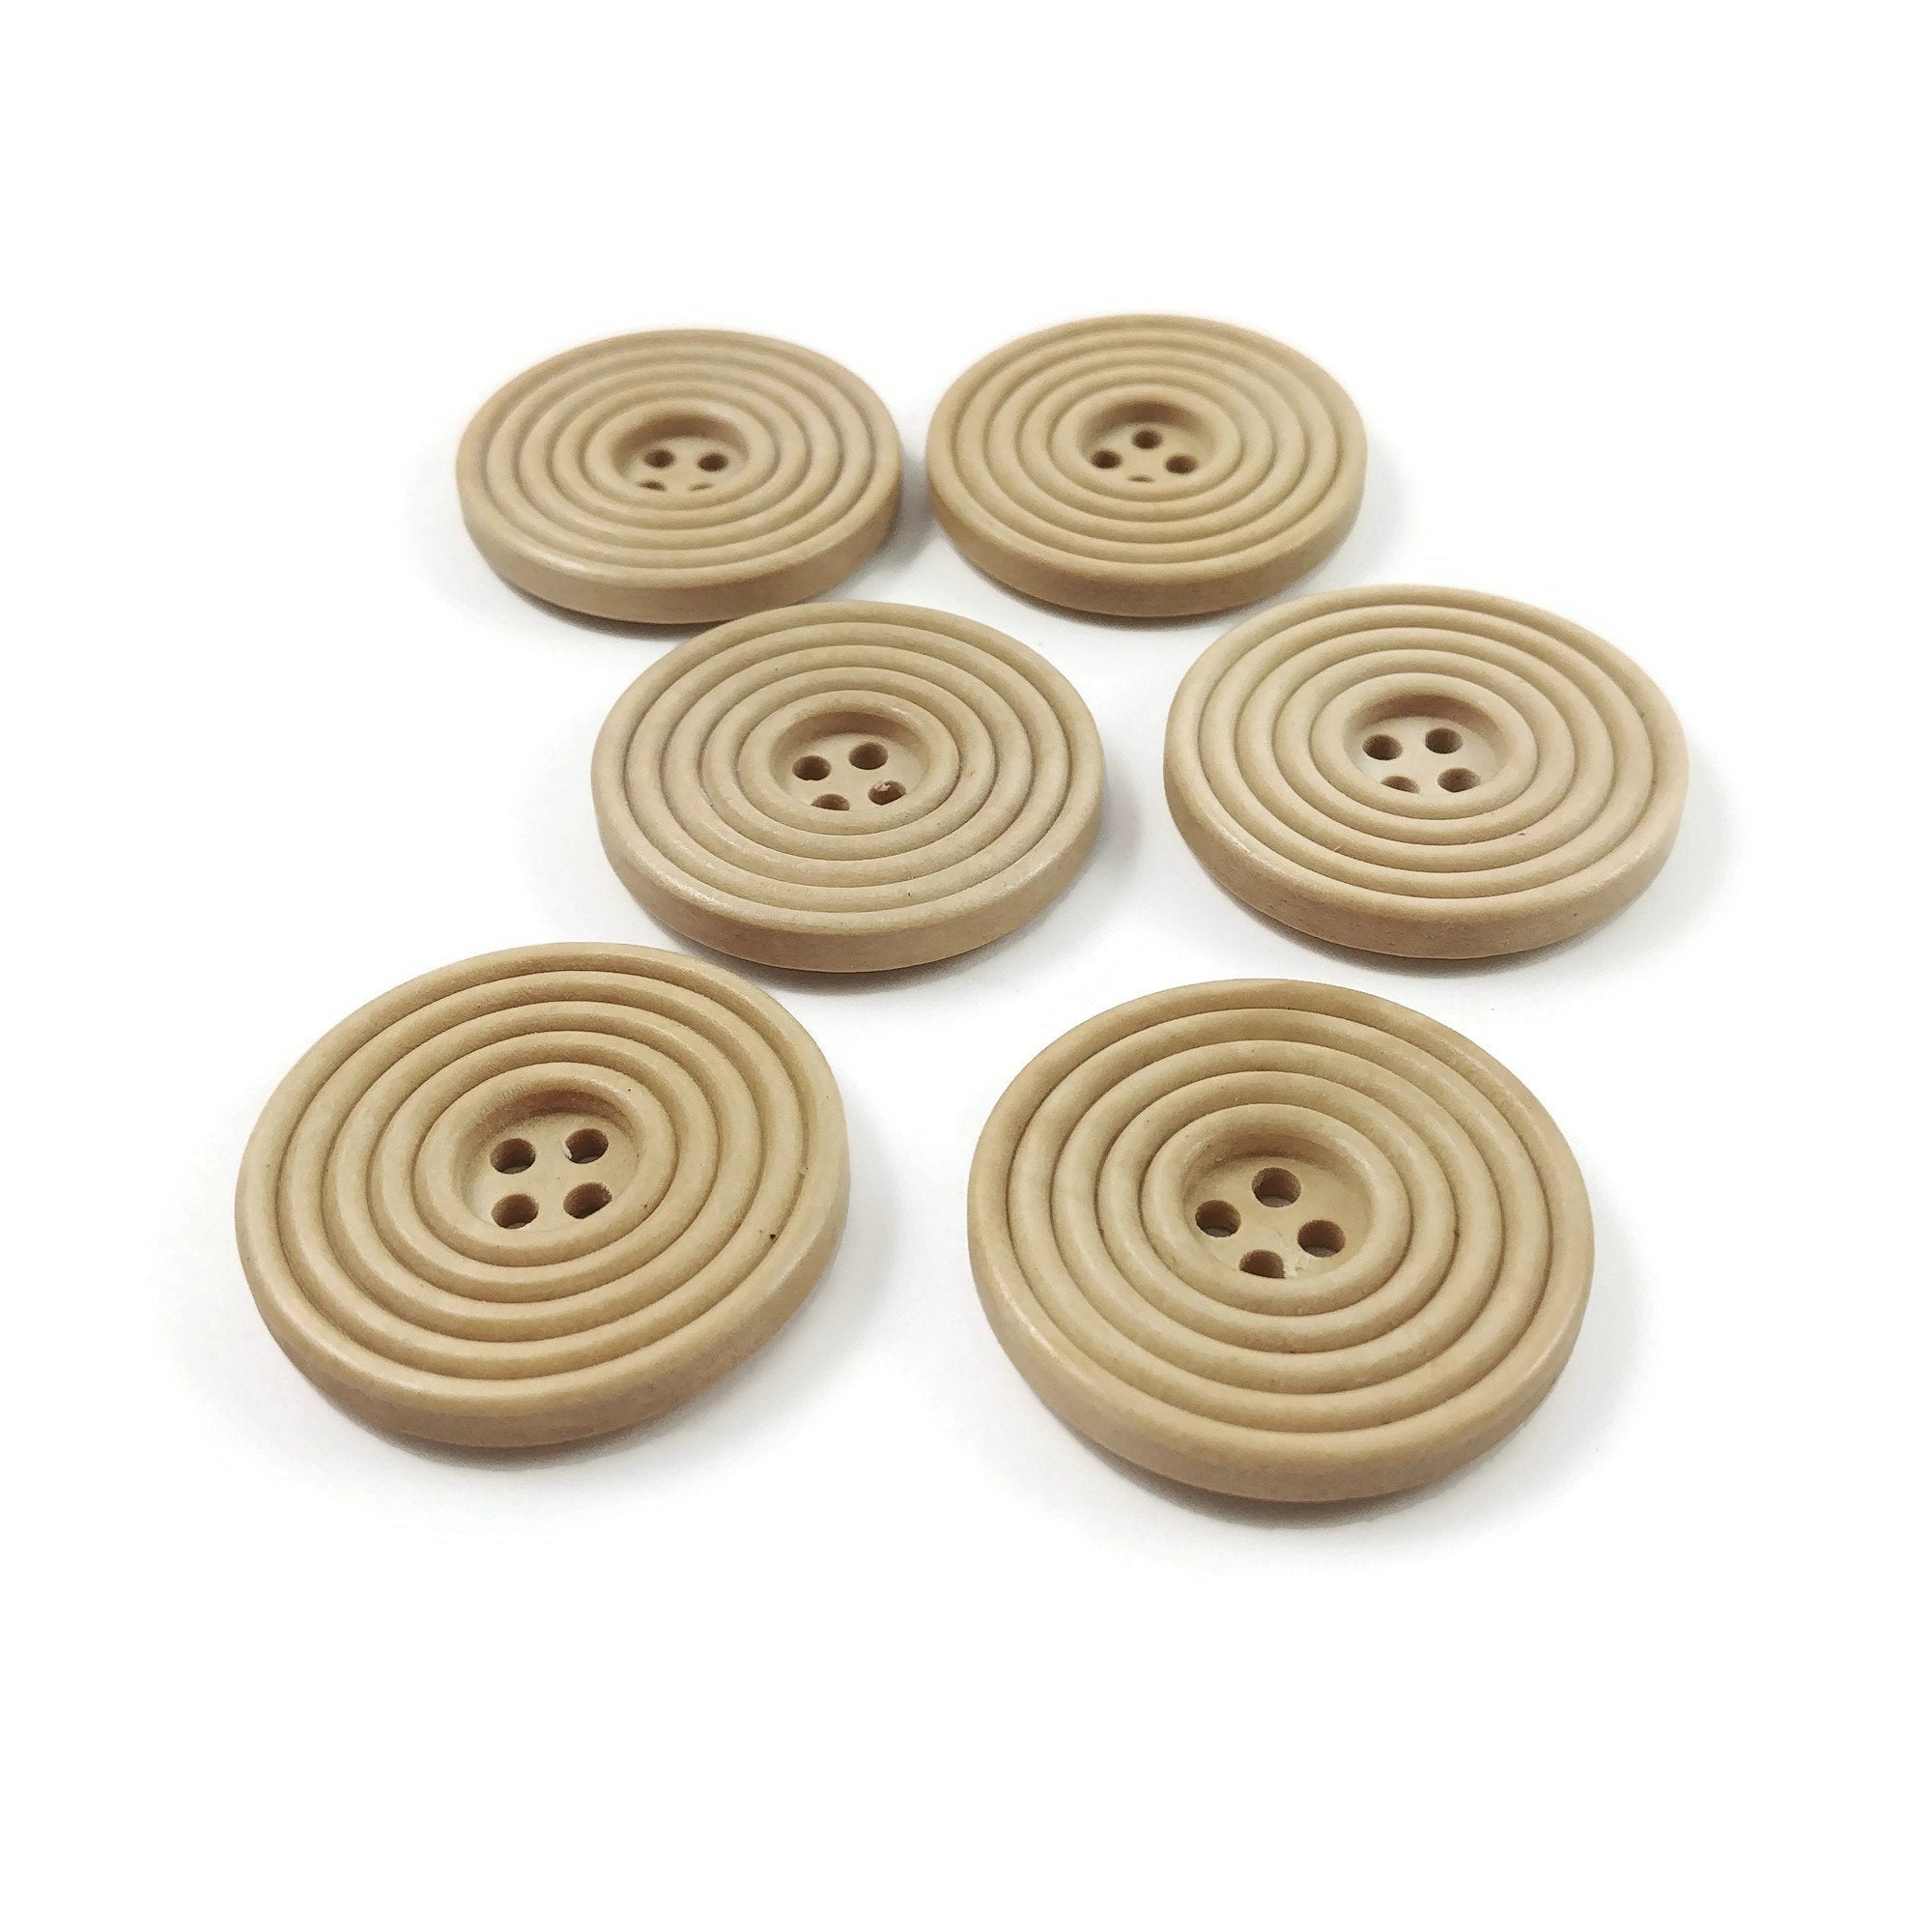 Wooden sewing buttons 30mm - set of 6 natural circle wood button